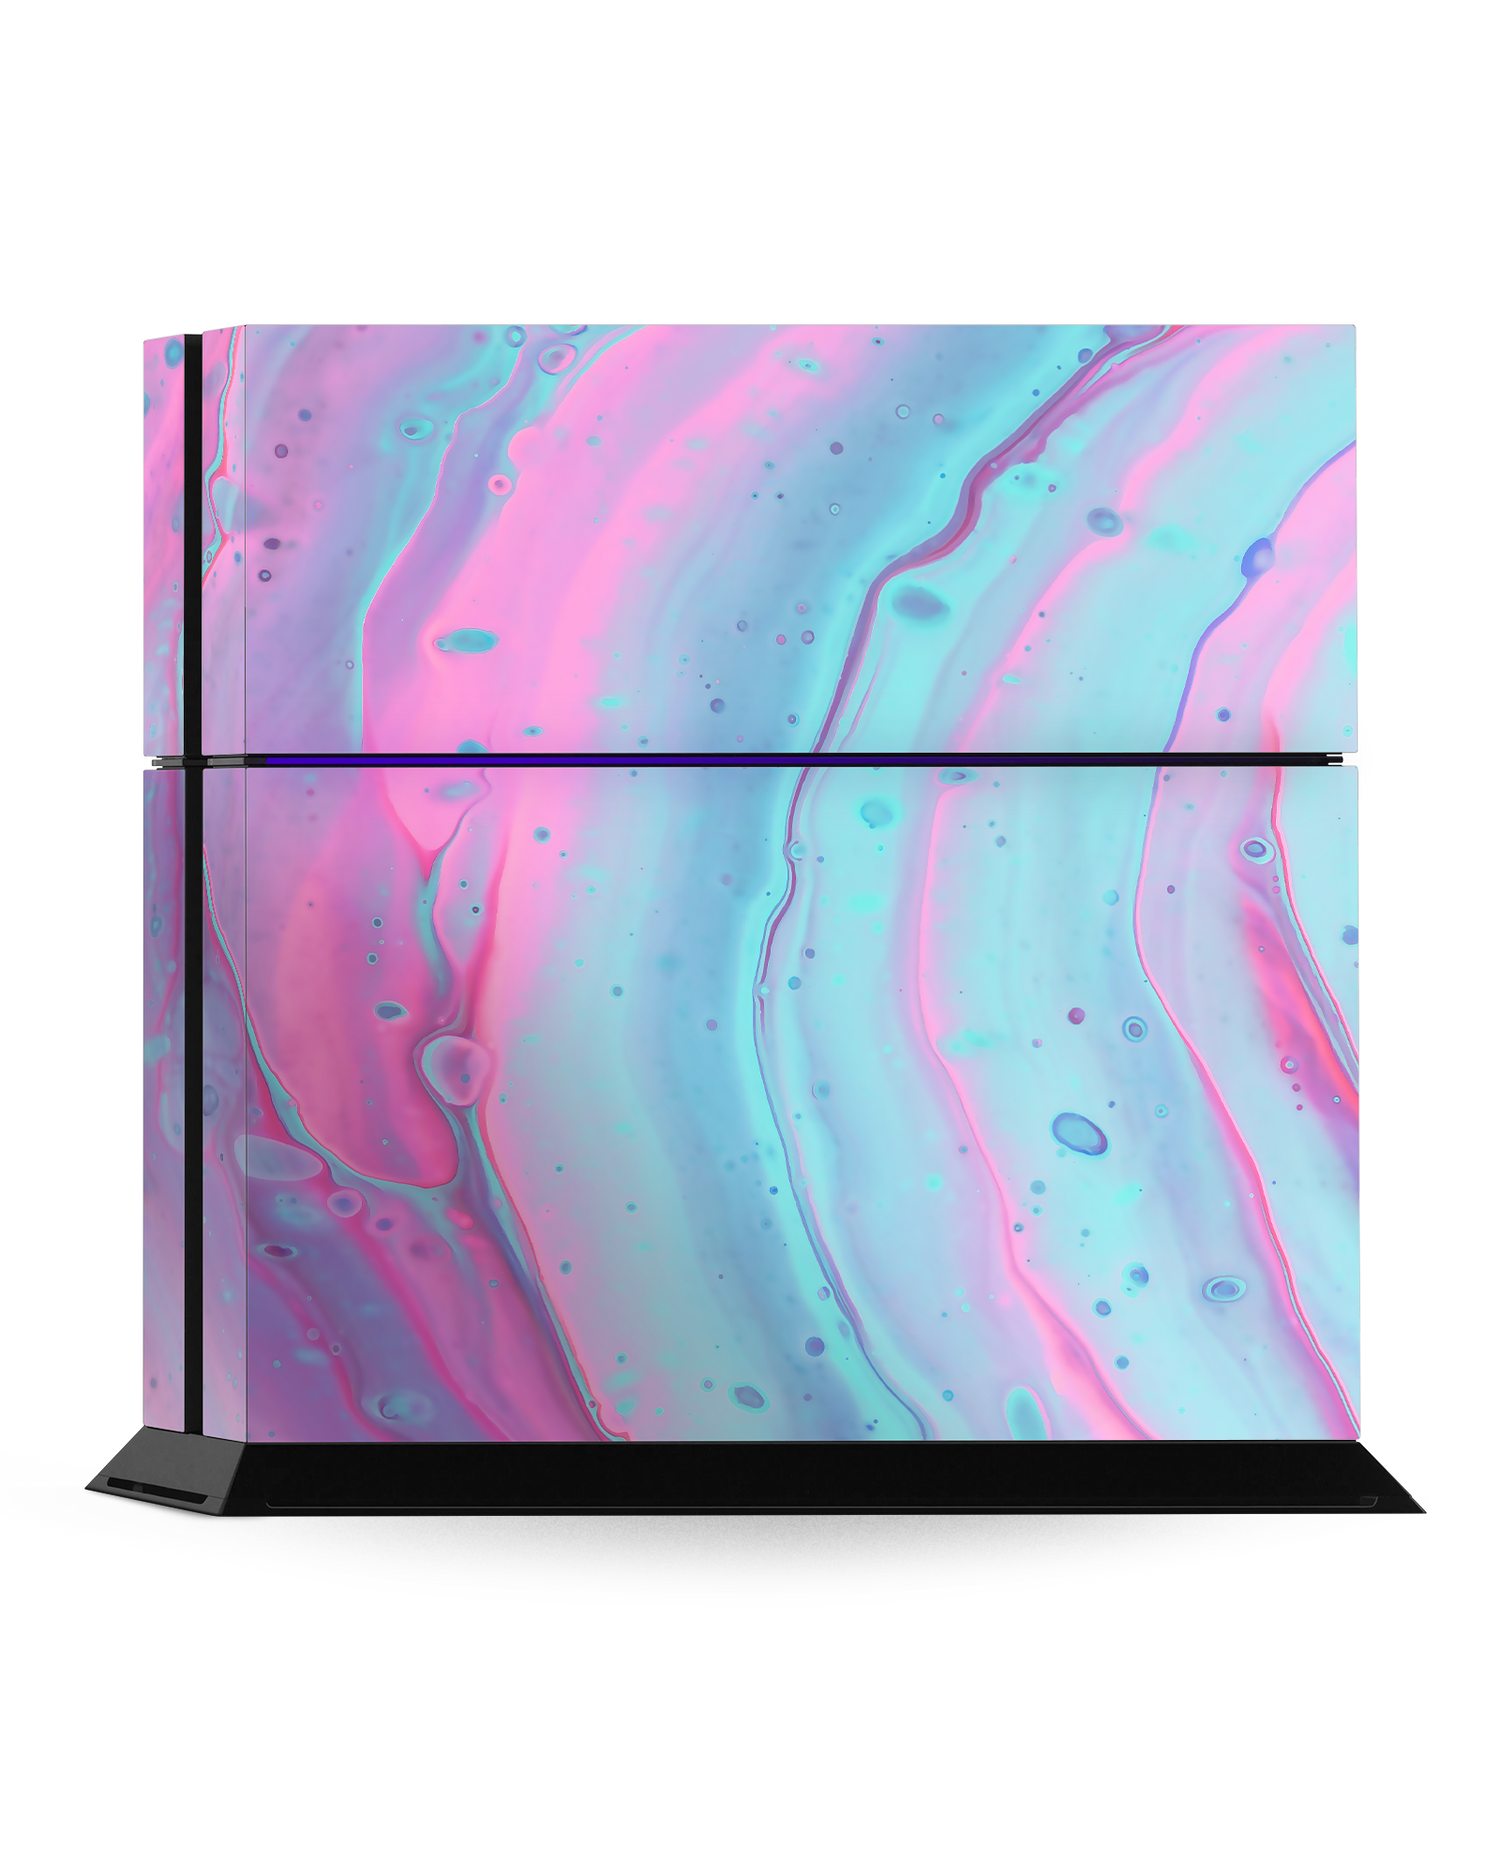 Wavey Console Skin for Sony PlayStation 4: Standing